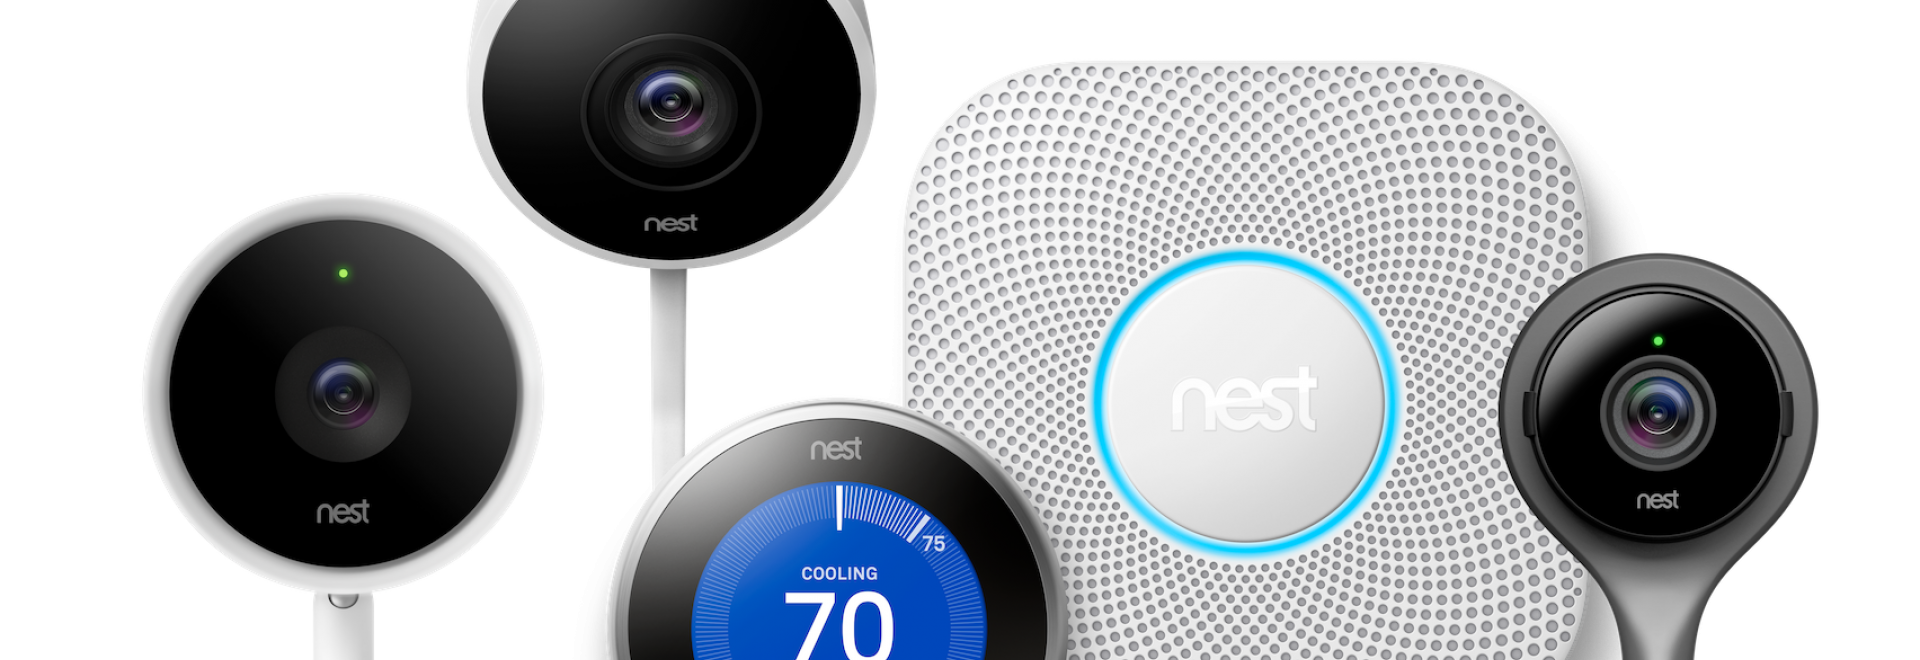 Nest create. Nest Pros and cons.